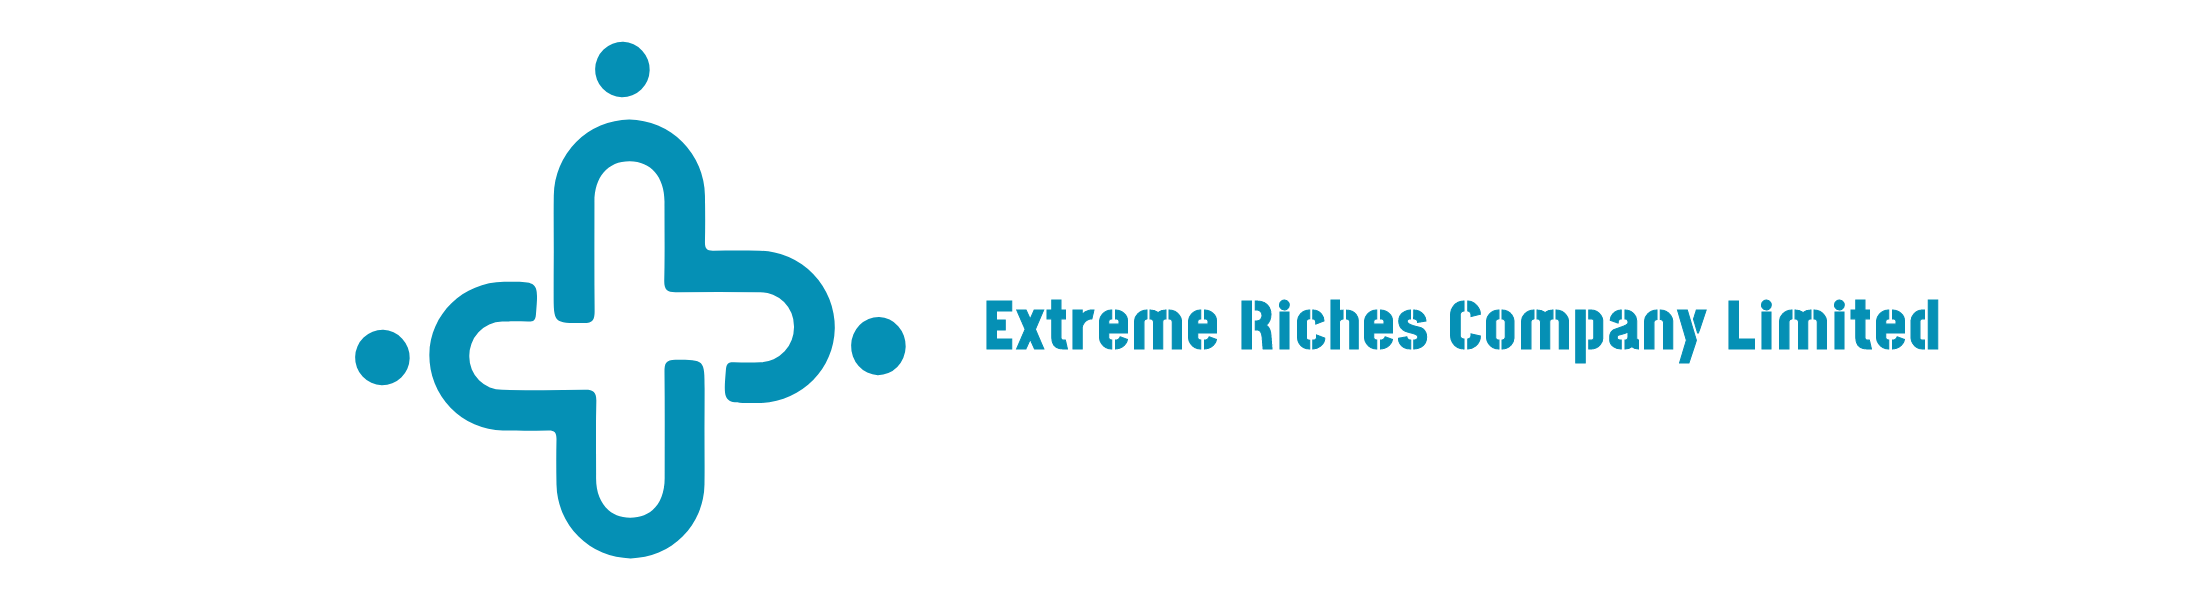 Extreme Riches Company Limited